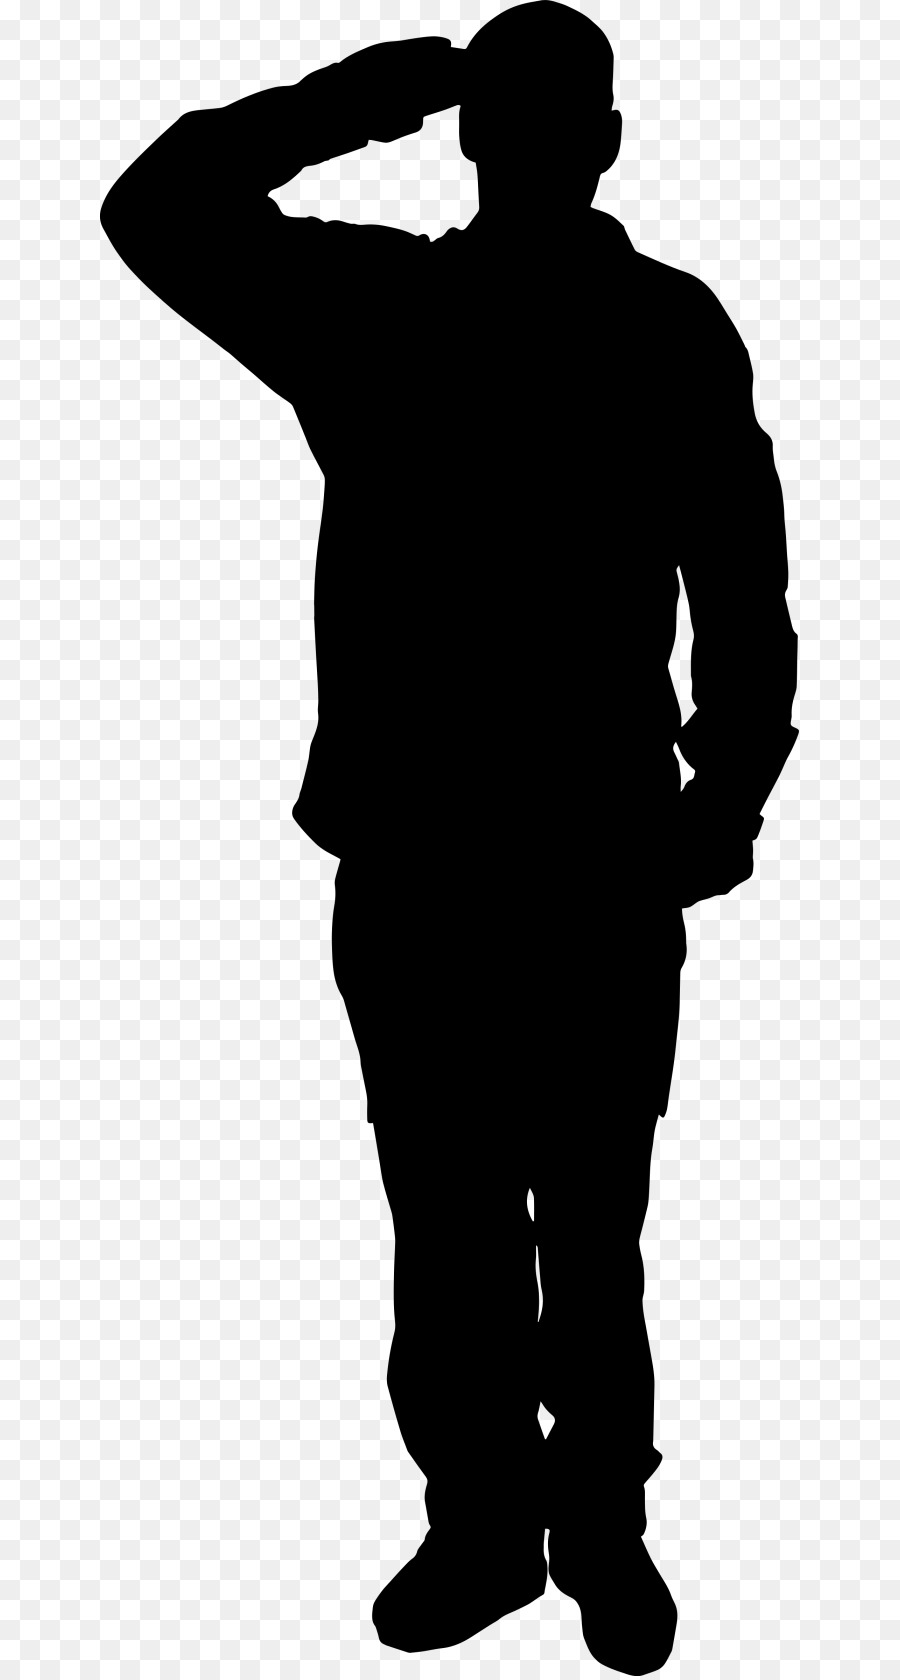 Soldier Veteran Silhouette Army Clip art - Soldier png download - 700*1676 - Free Transparent Soldier png Download.